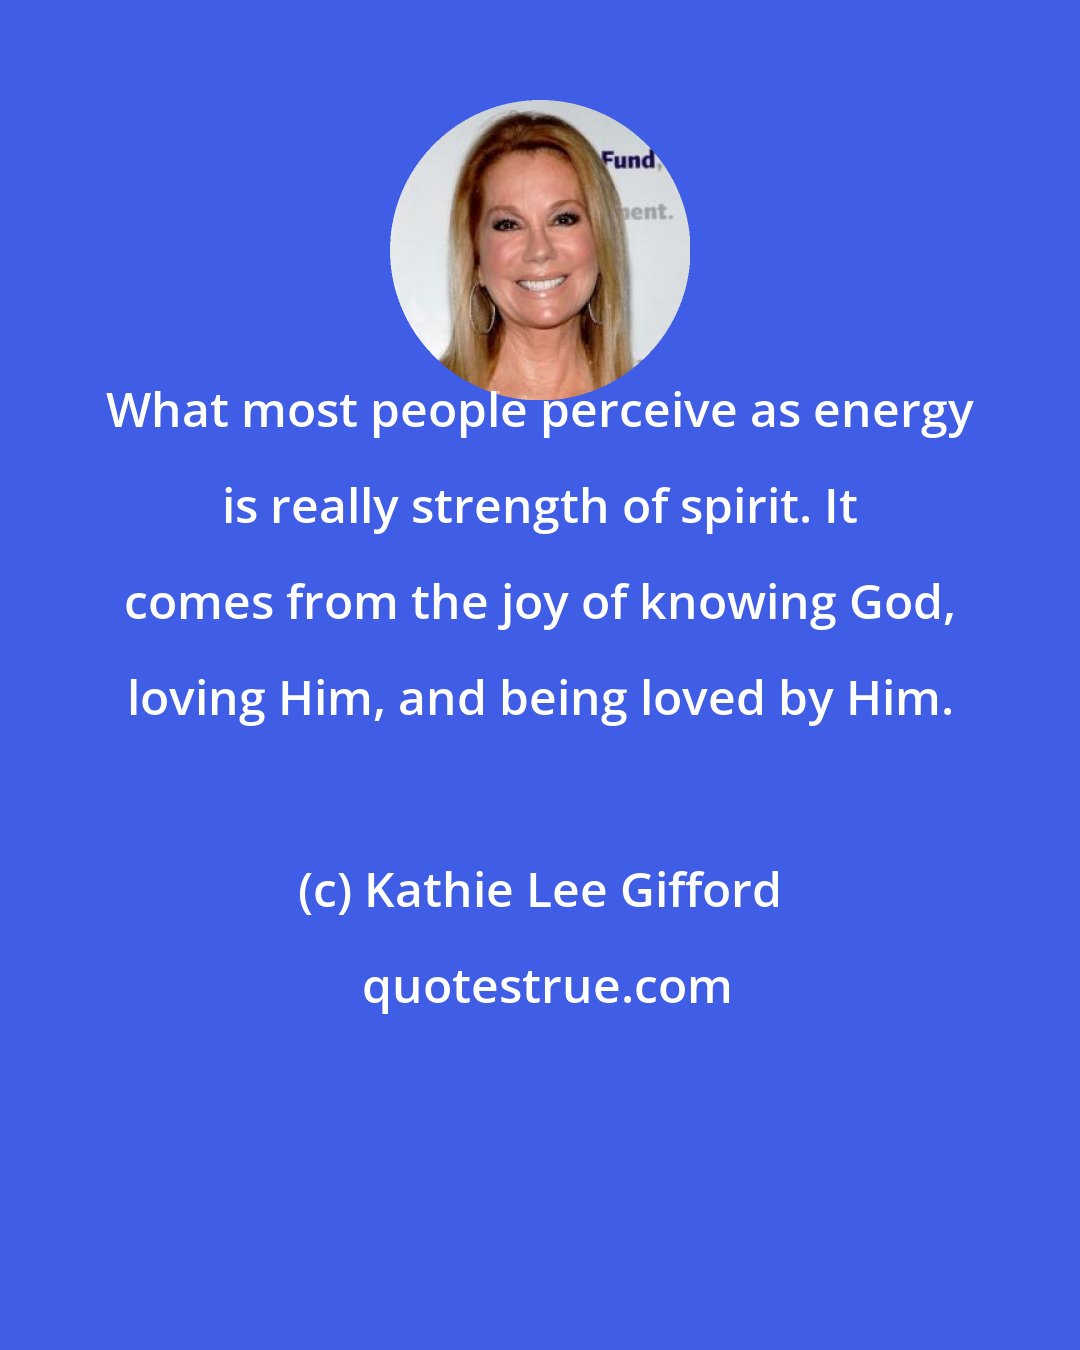 Kathie Lee Gifford: What most people perceive as energy is really strength of spirit. It comes from the joy of knowing God, loving Him, and being loved by Him.